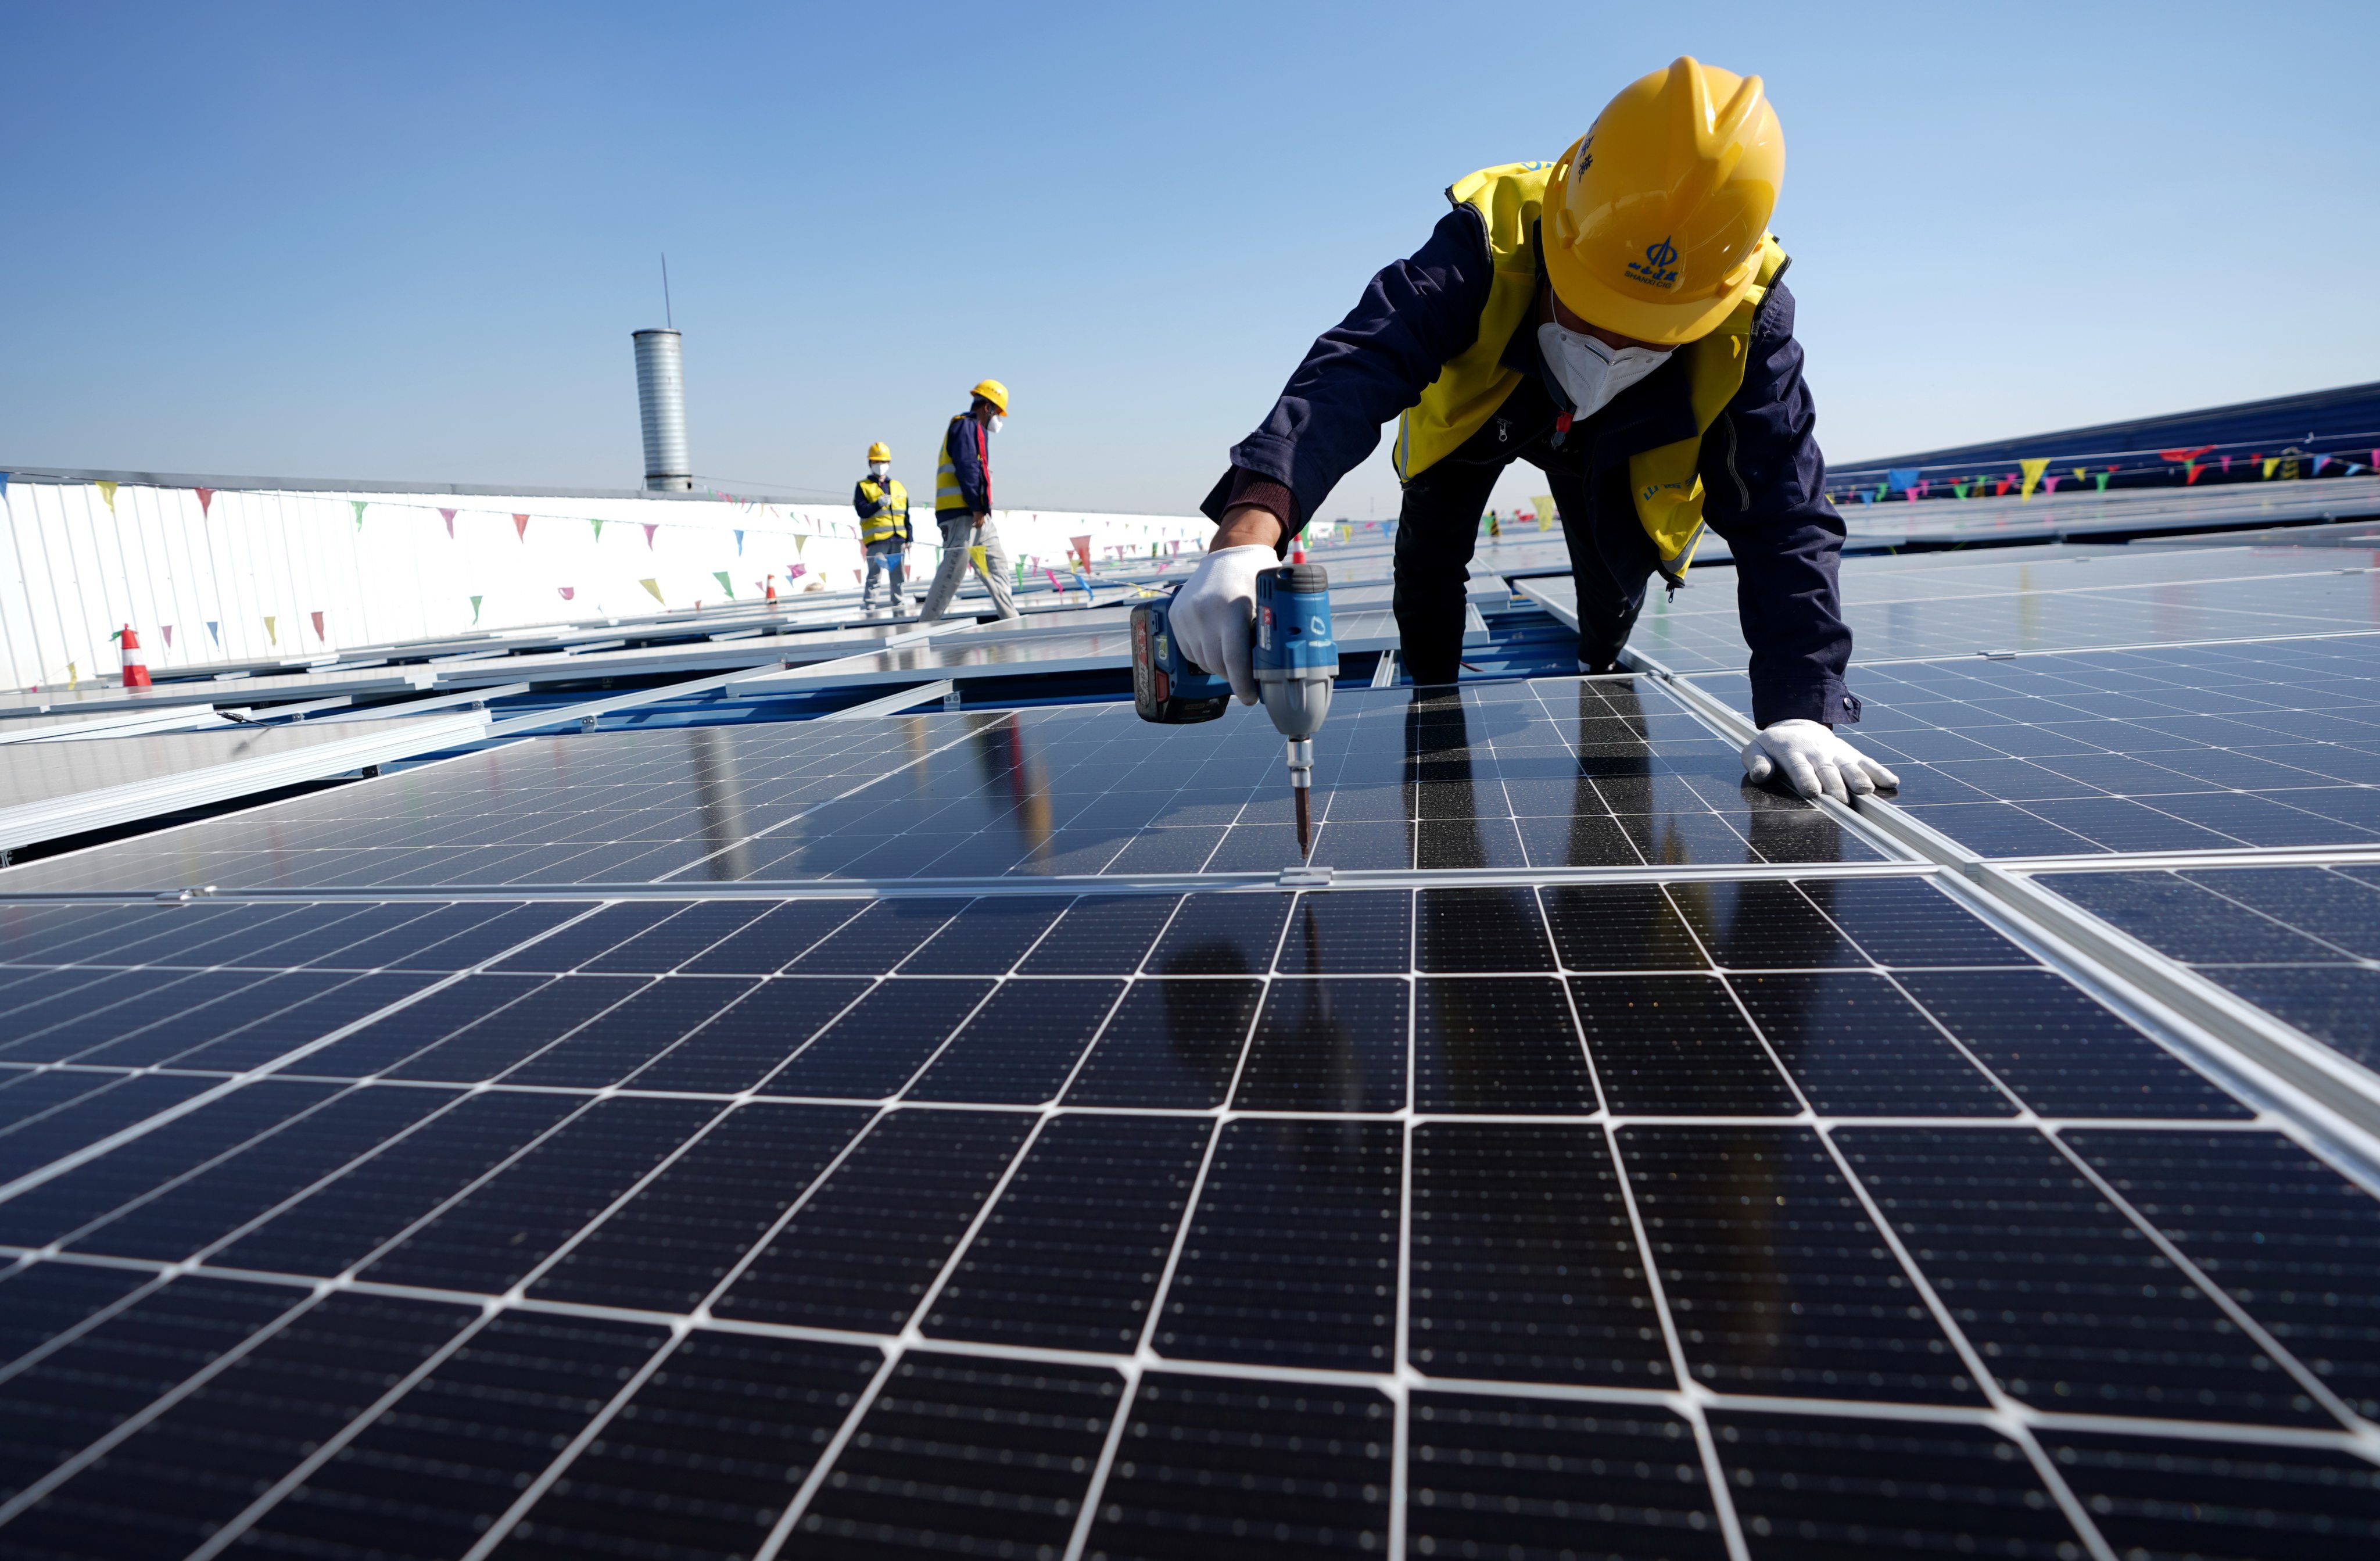 A worker installs photovoltaic power panels on a roof in Tangshan, Hebei province. China makes and supplies more than 80 per cent of the world’s photovoltaic panels, according to the International Energy Agency. Photo: Xinhua